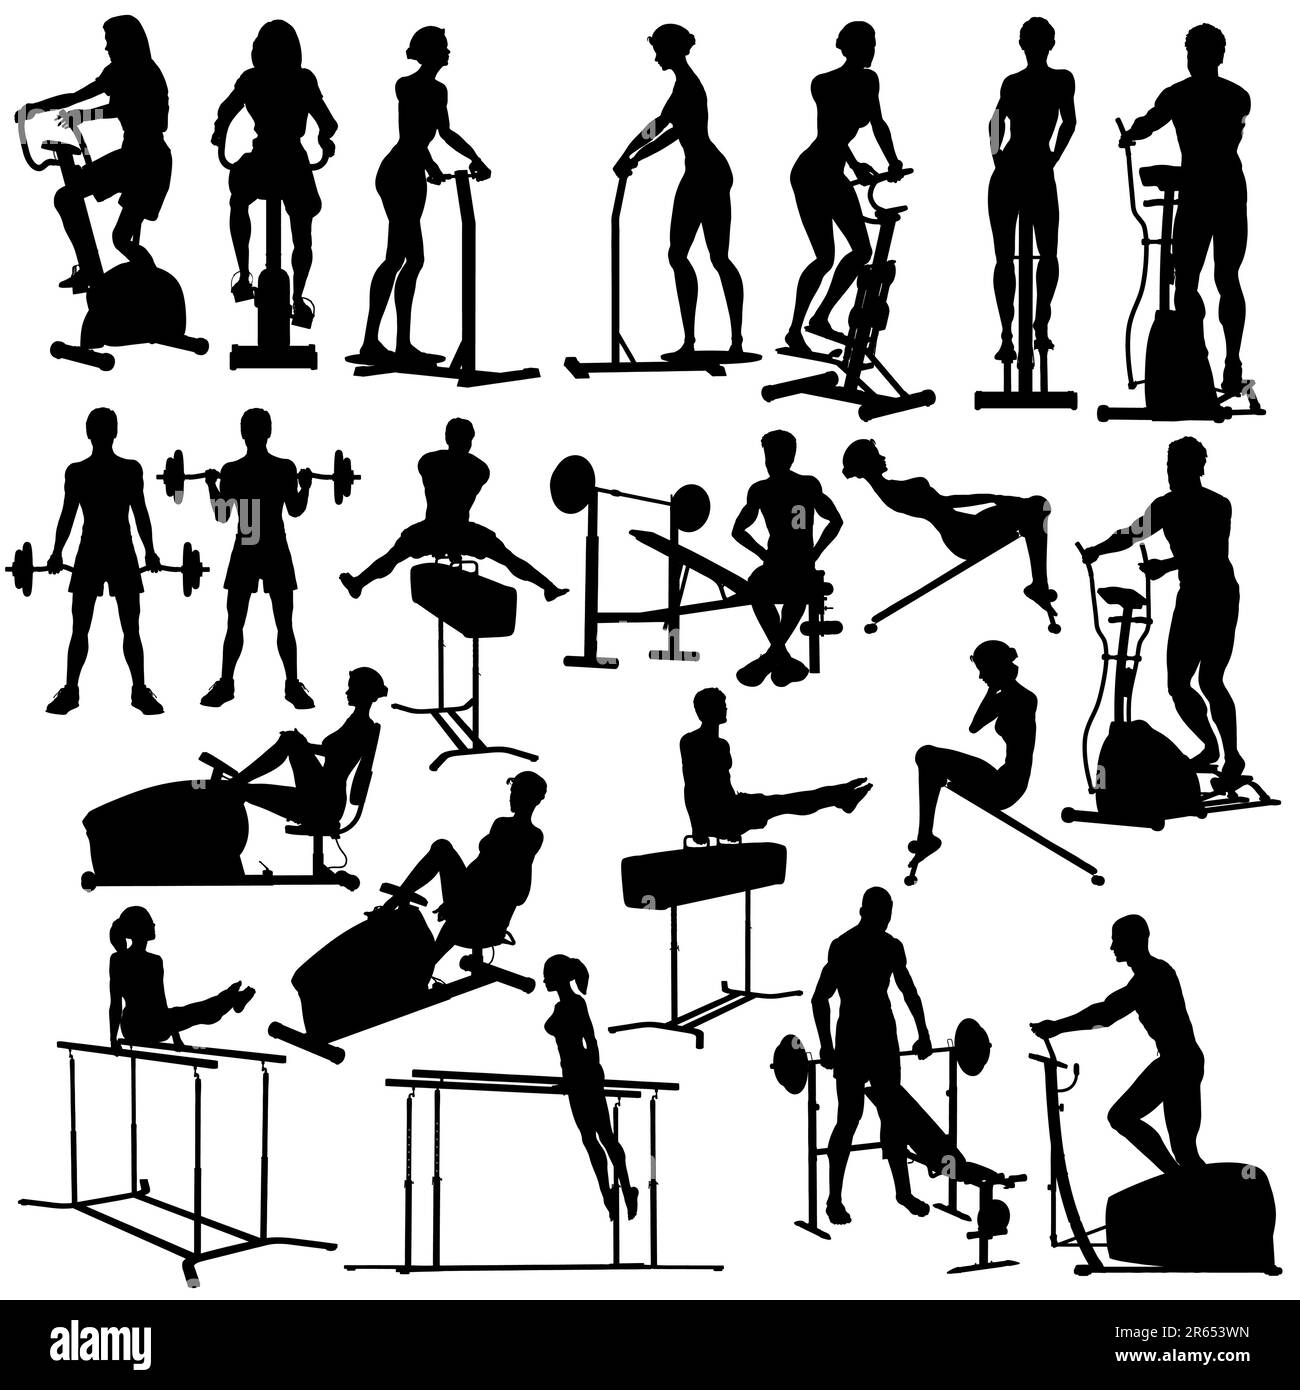 Set of silhouettes of people exercising in the gym with all figures and equipment as separate objects Stock Vector